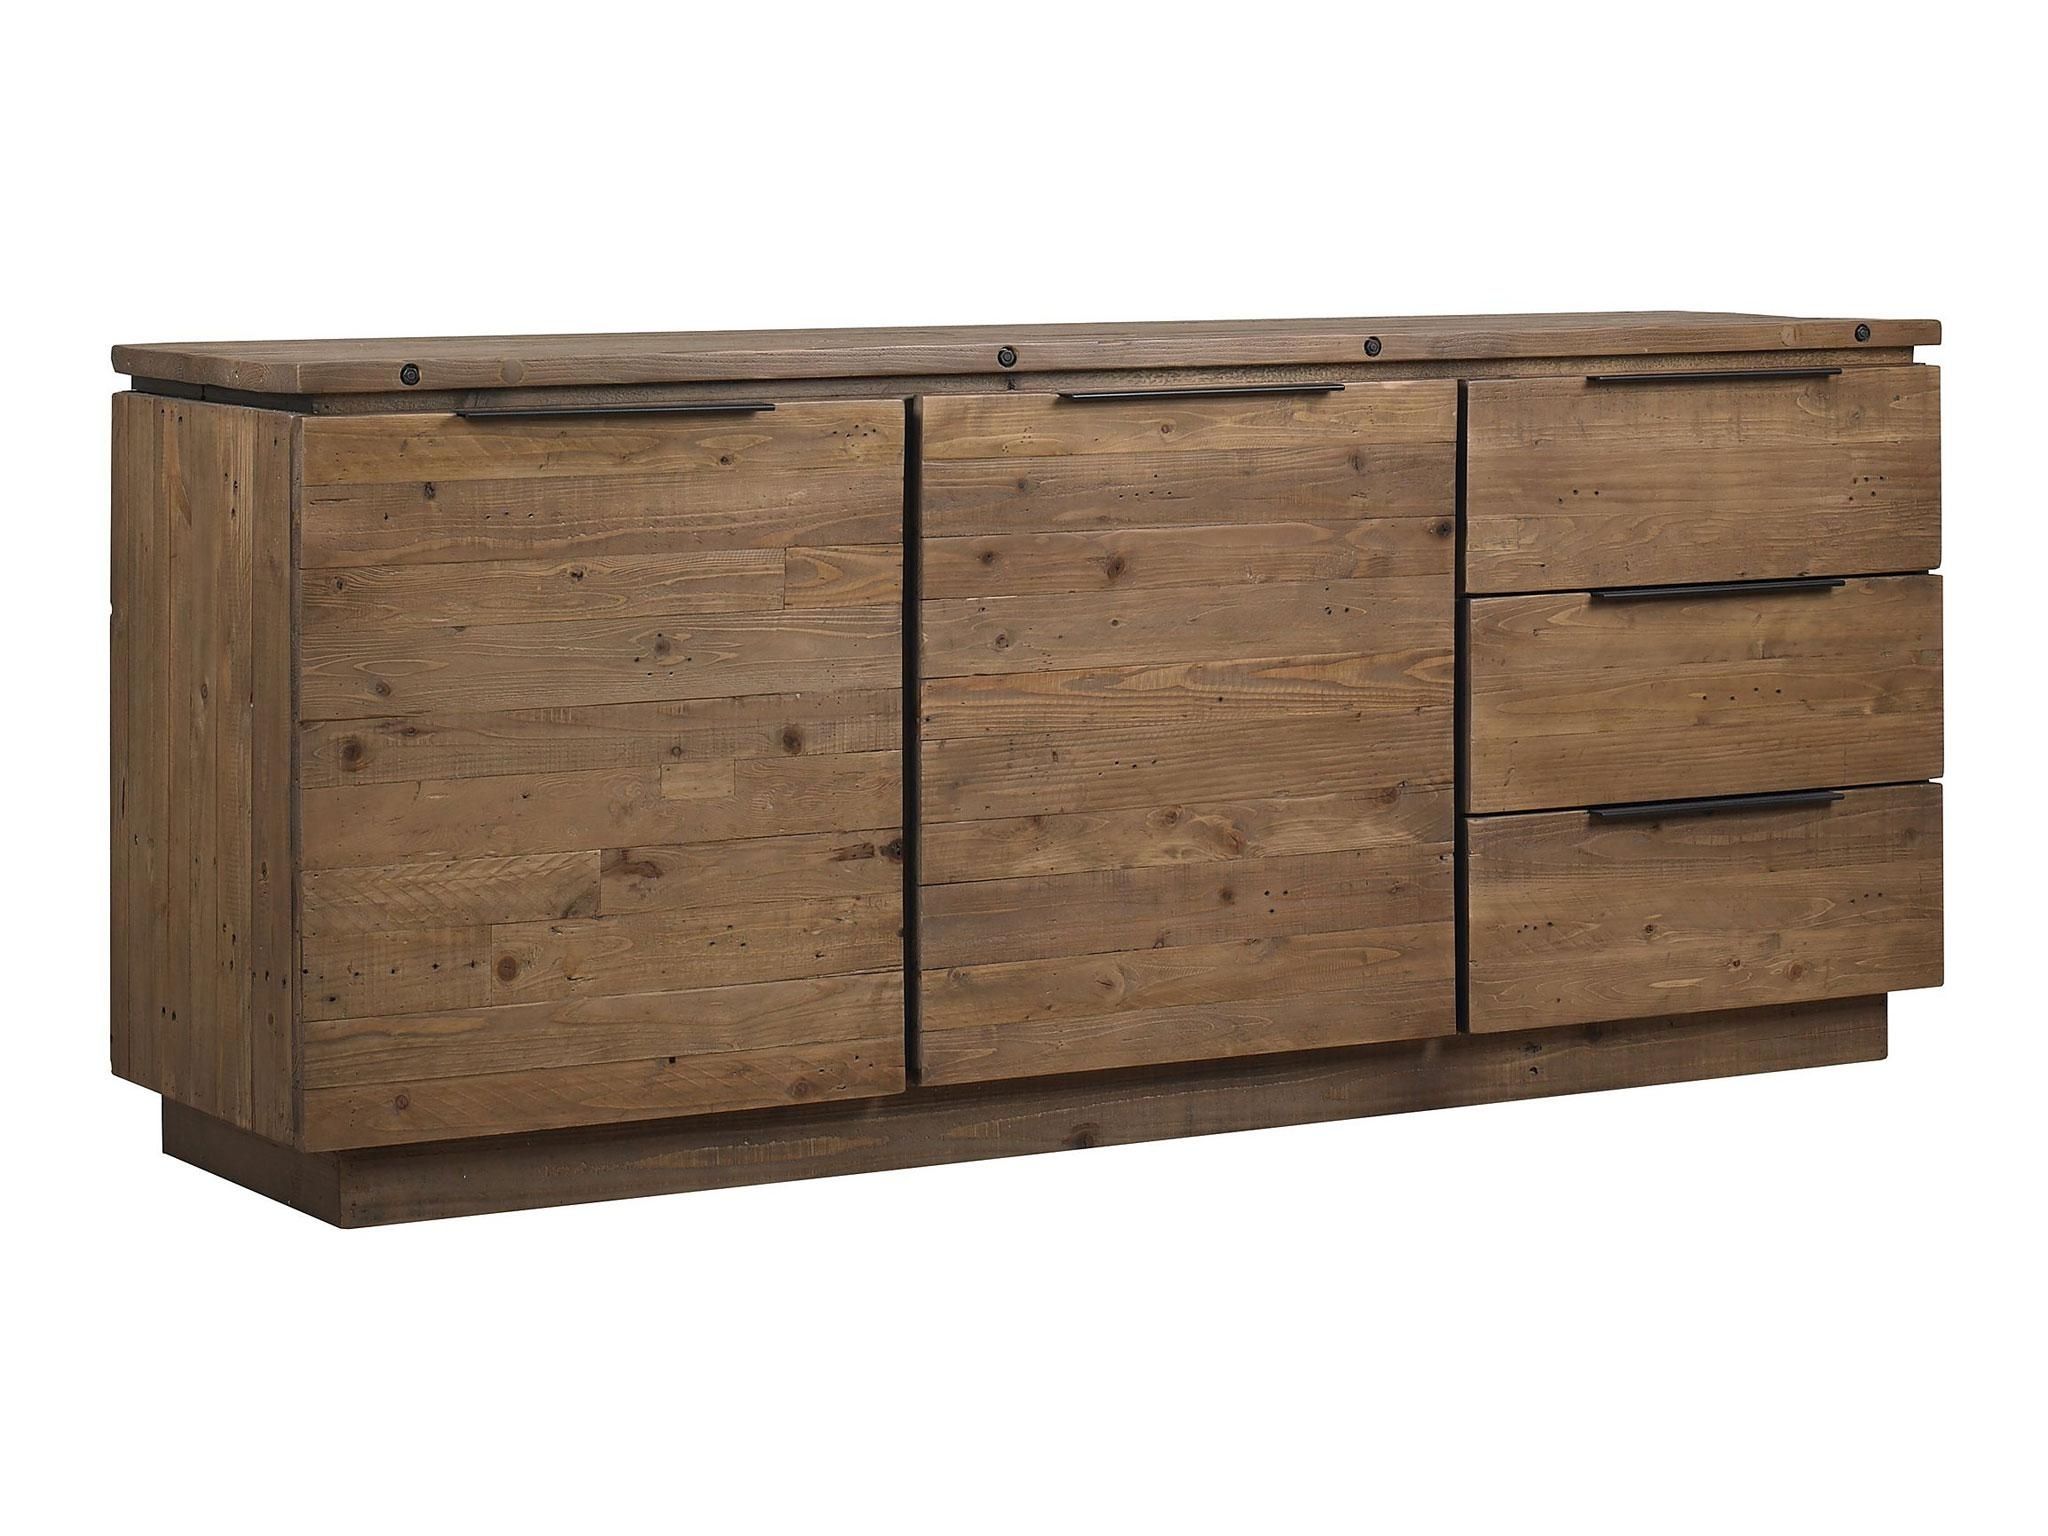 10 Best Sideboards | The Independent In Best And Newest Oil Pale Finish 4 Door Sideboards (View 9 of 20)